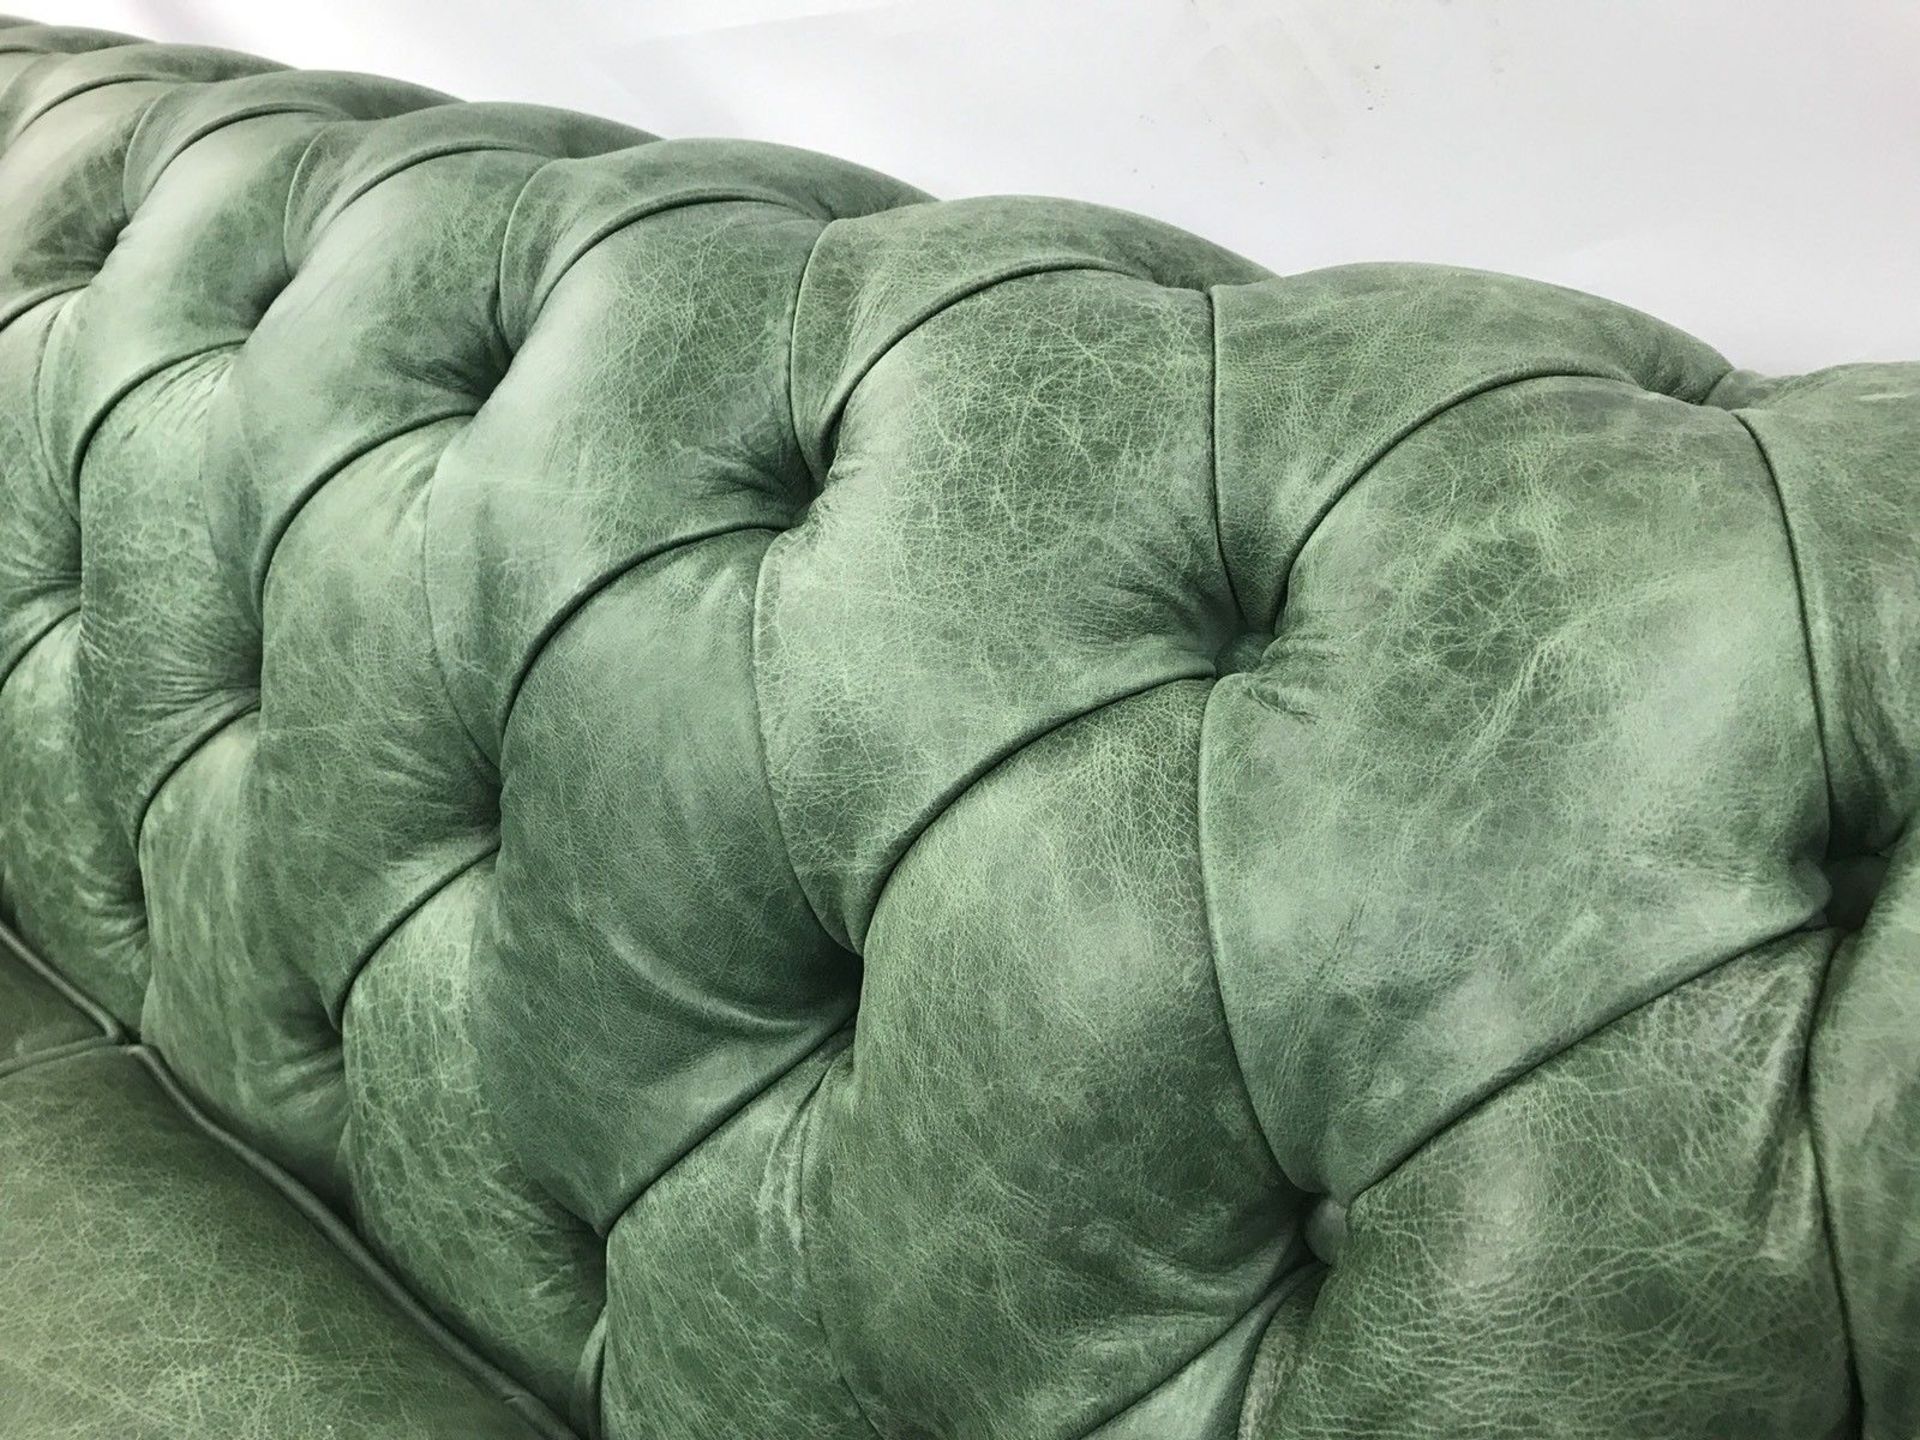 Paris 2 Seater Chesterfield In Selvagio Verde Distressed Leather Beautifully Creative And - Image 3 of 3